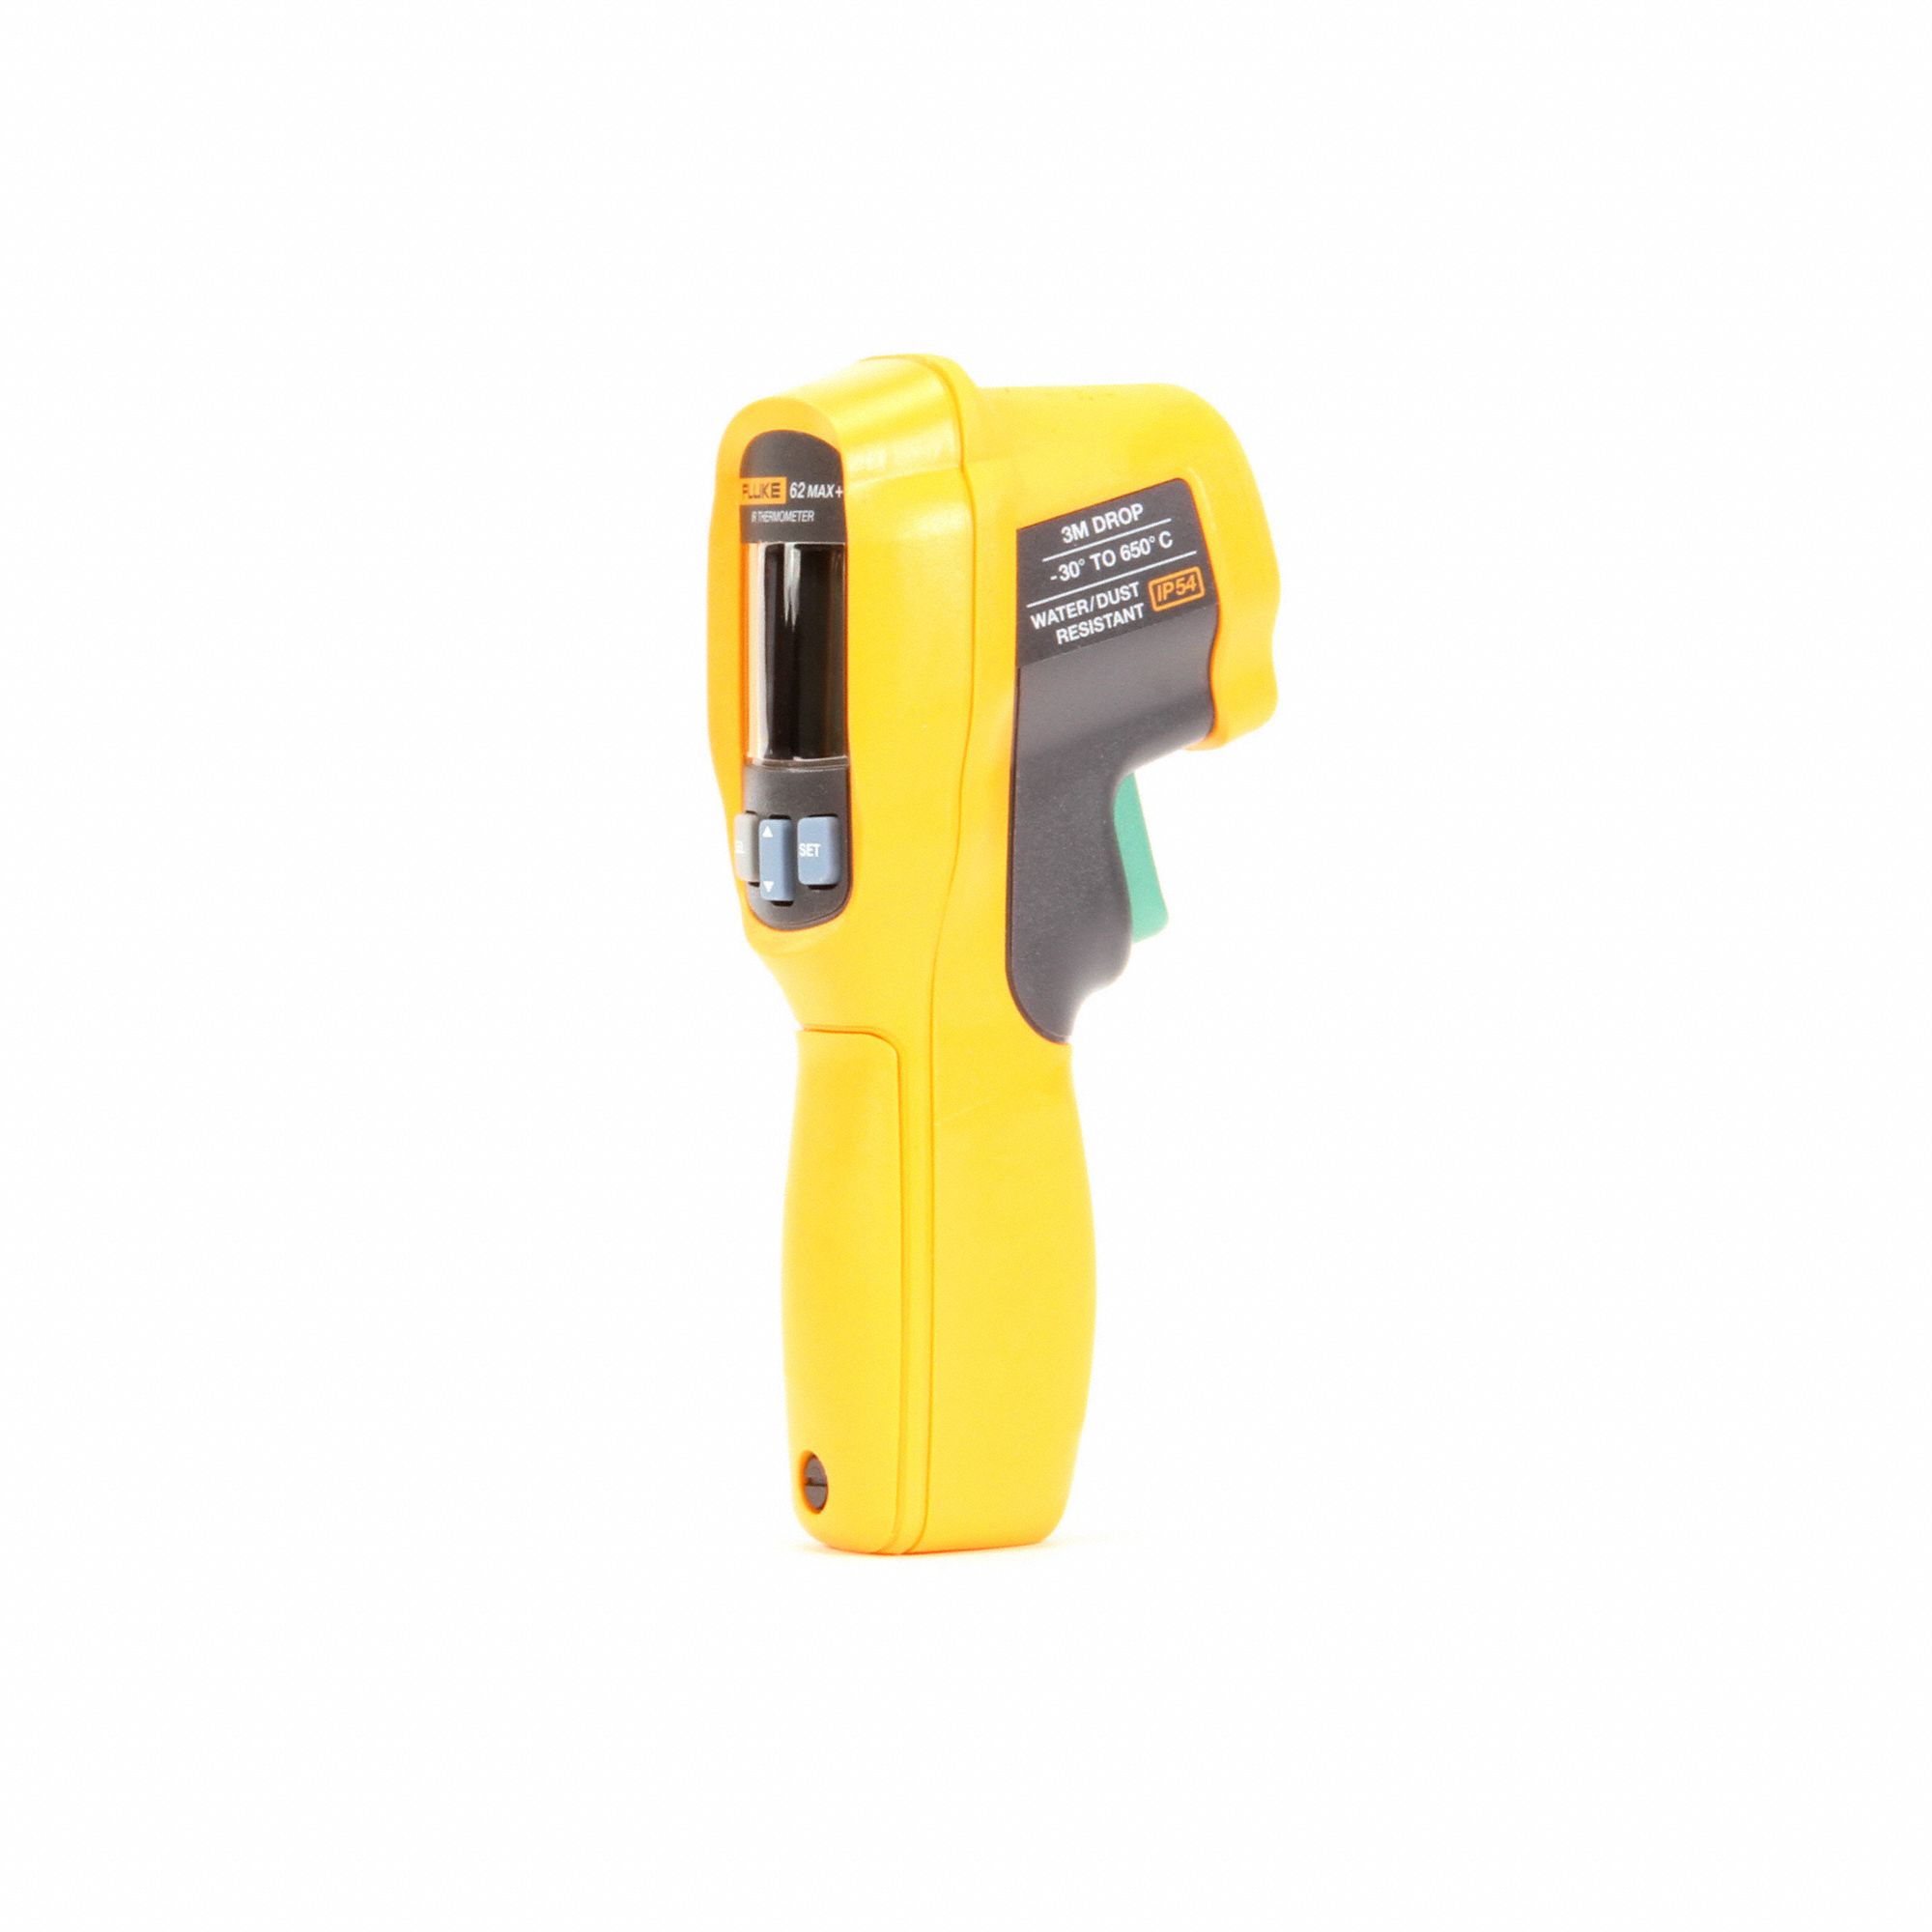 FLUKE, -20° to 1202°, 1 in @ 12 in Focus, Infrared Thermometer - 16X950